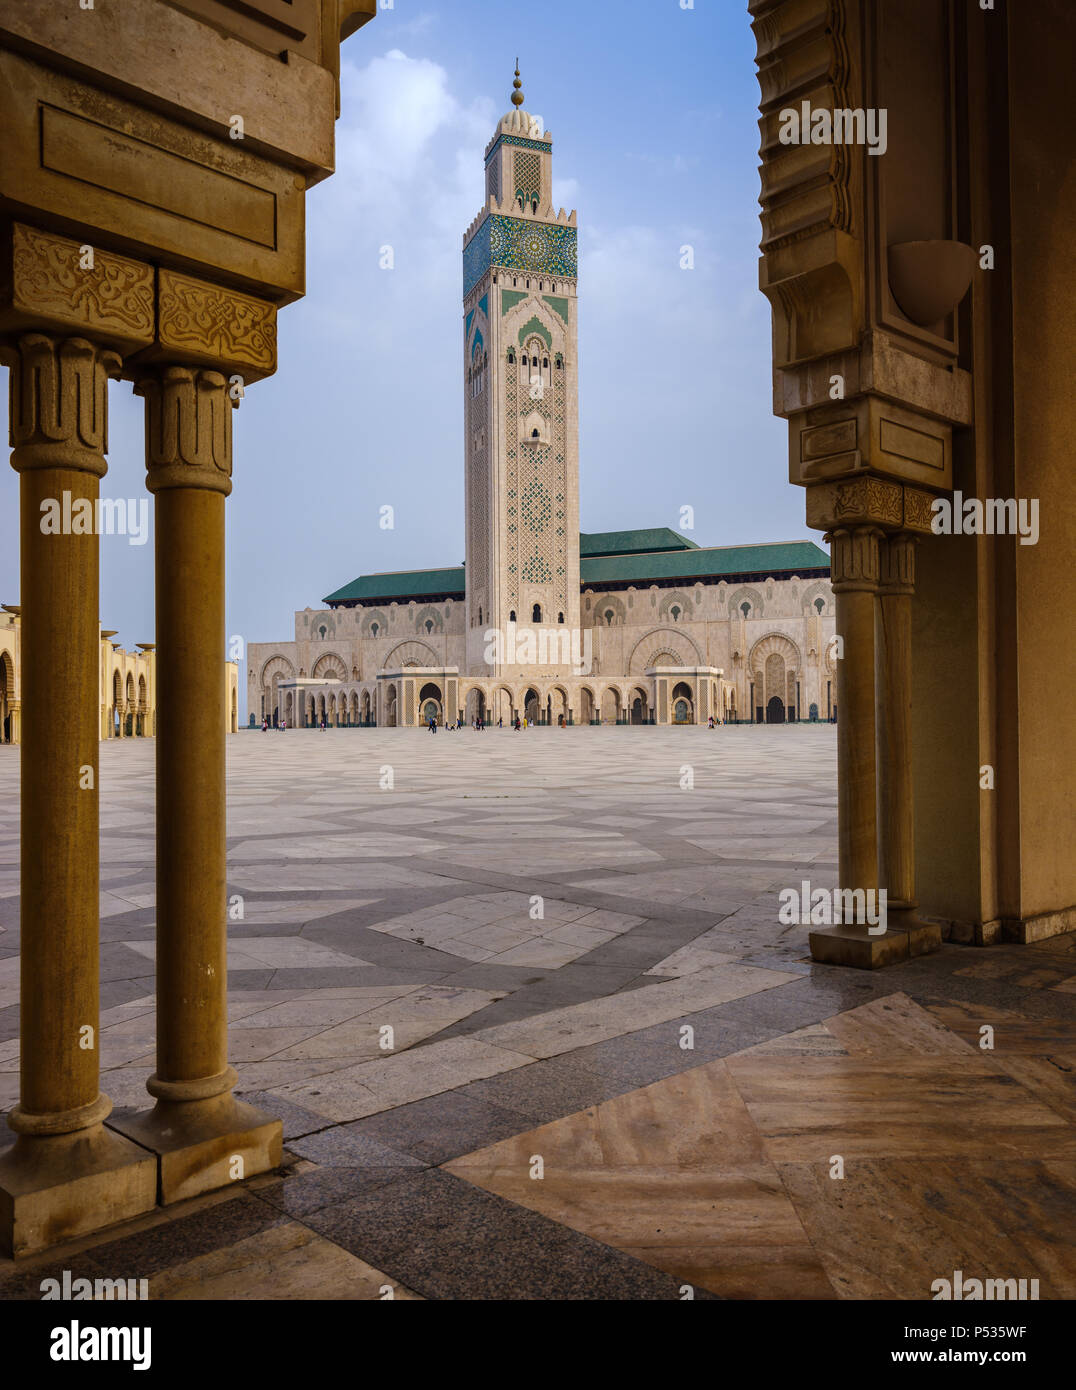 Just posted some new images from Casablanca on my blog, (link on bio). Great place, this one from the impressive Mosque Hassan II in all its glory. Tr Stock Photo